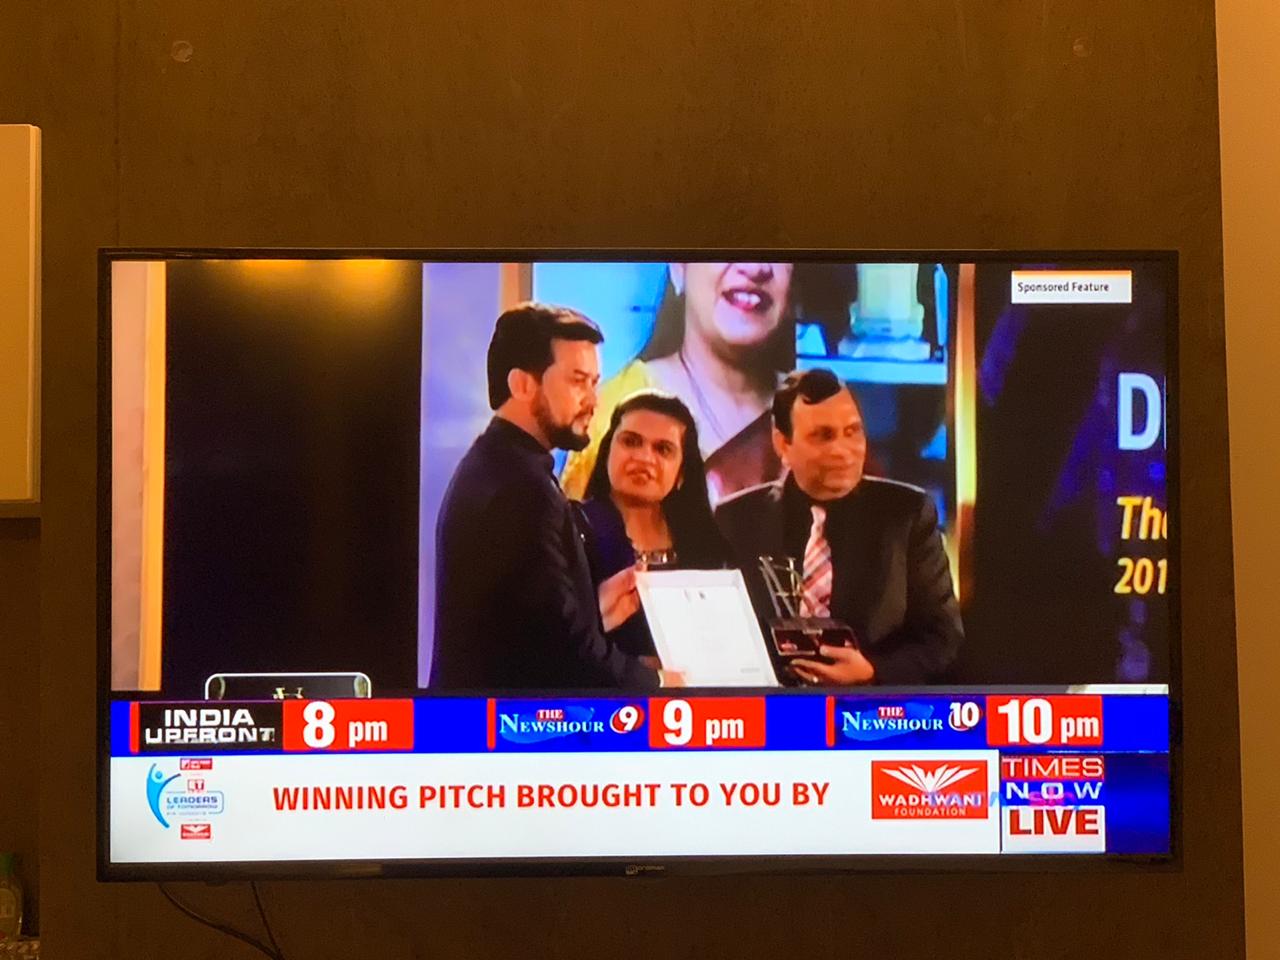 Times Now - Brand Vision Summit 2019-2020